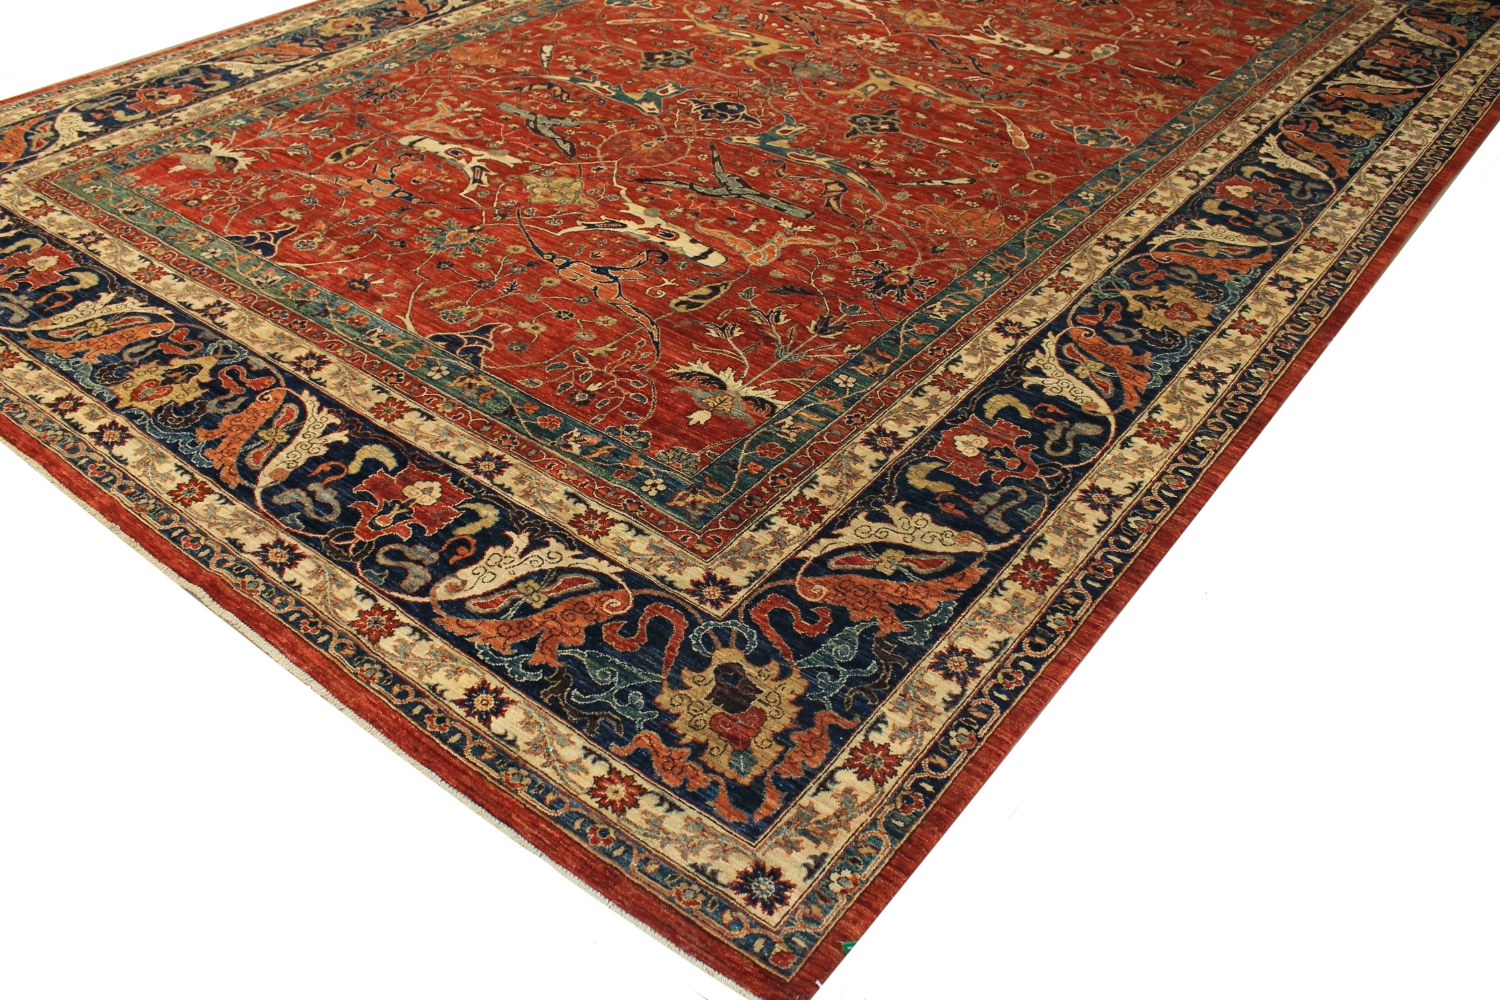 OVERSIZE Aryana & Antique Revivals Hand Knotted Wool Area Rug - MR026334